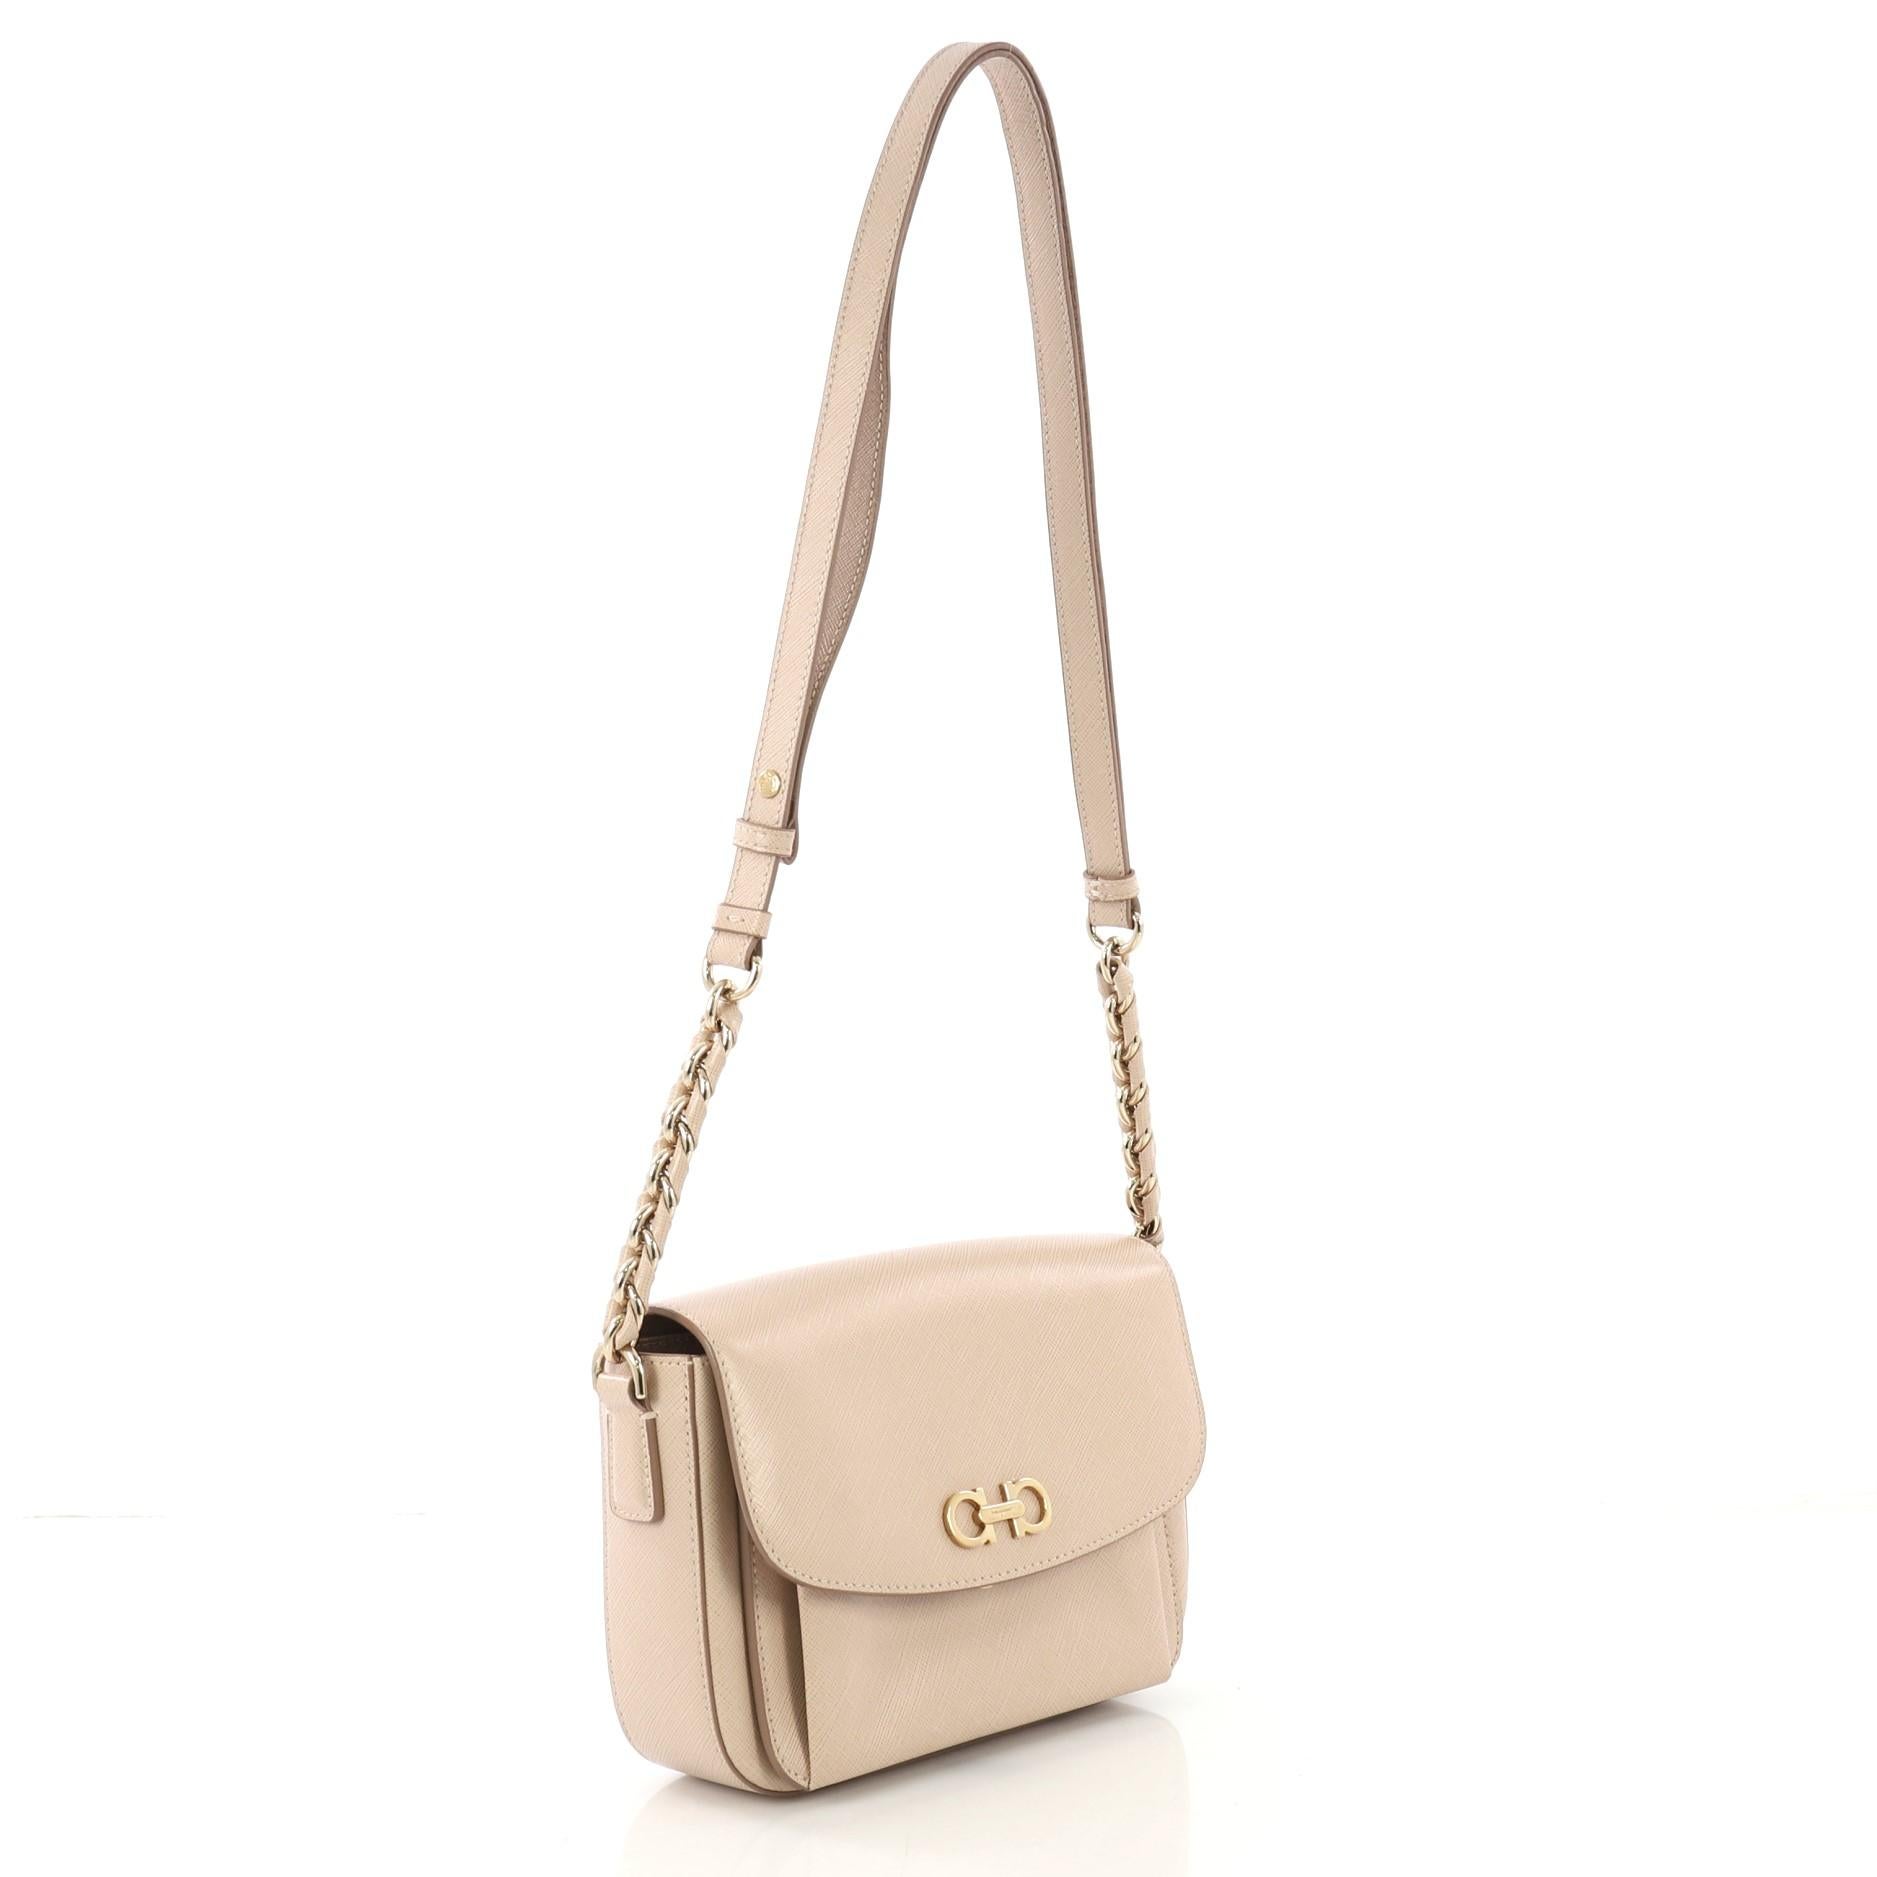 This Salvatore Ferragamo Sandrine Shoulder Bag Saffiano Leather Small, crafted in beige saffiano leather, features an adjustable leather strap, Gancini logo on its flap, and gold-tone hardware. Its hidden clasp closure opens to a brown satin